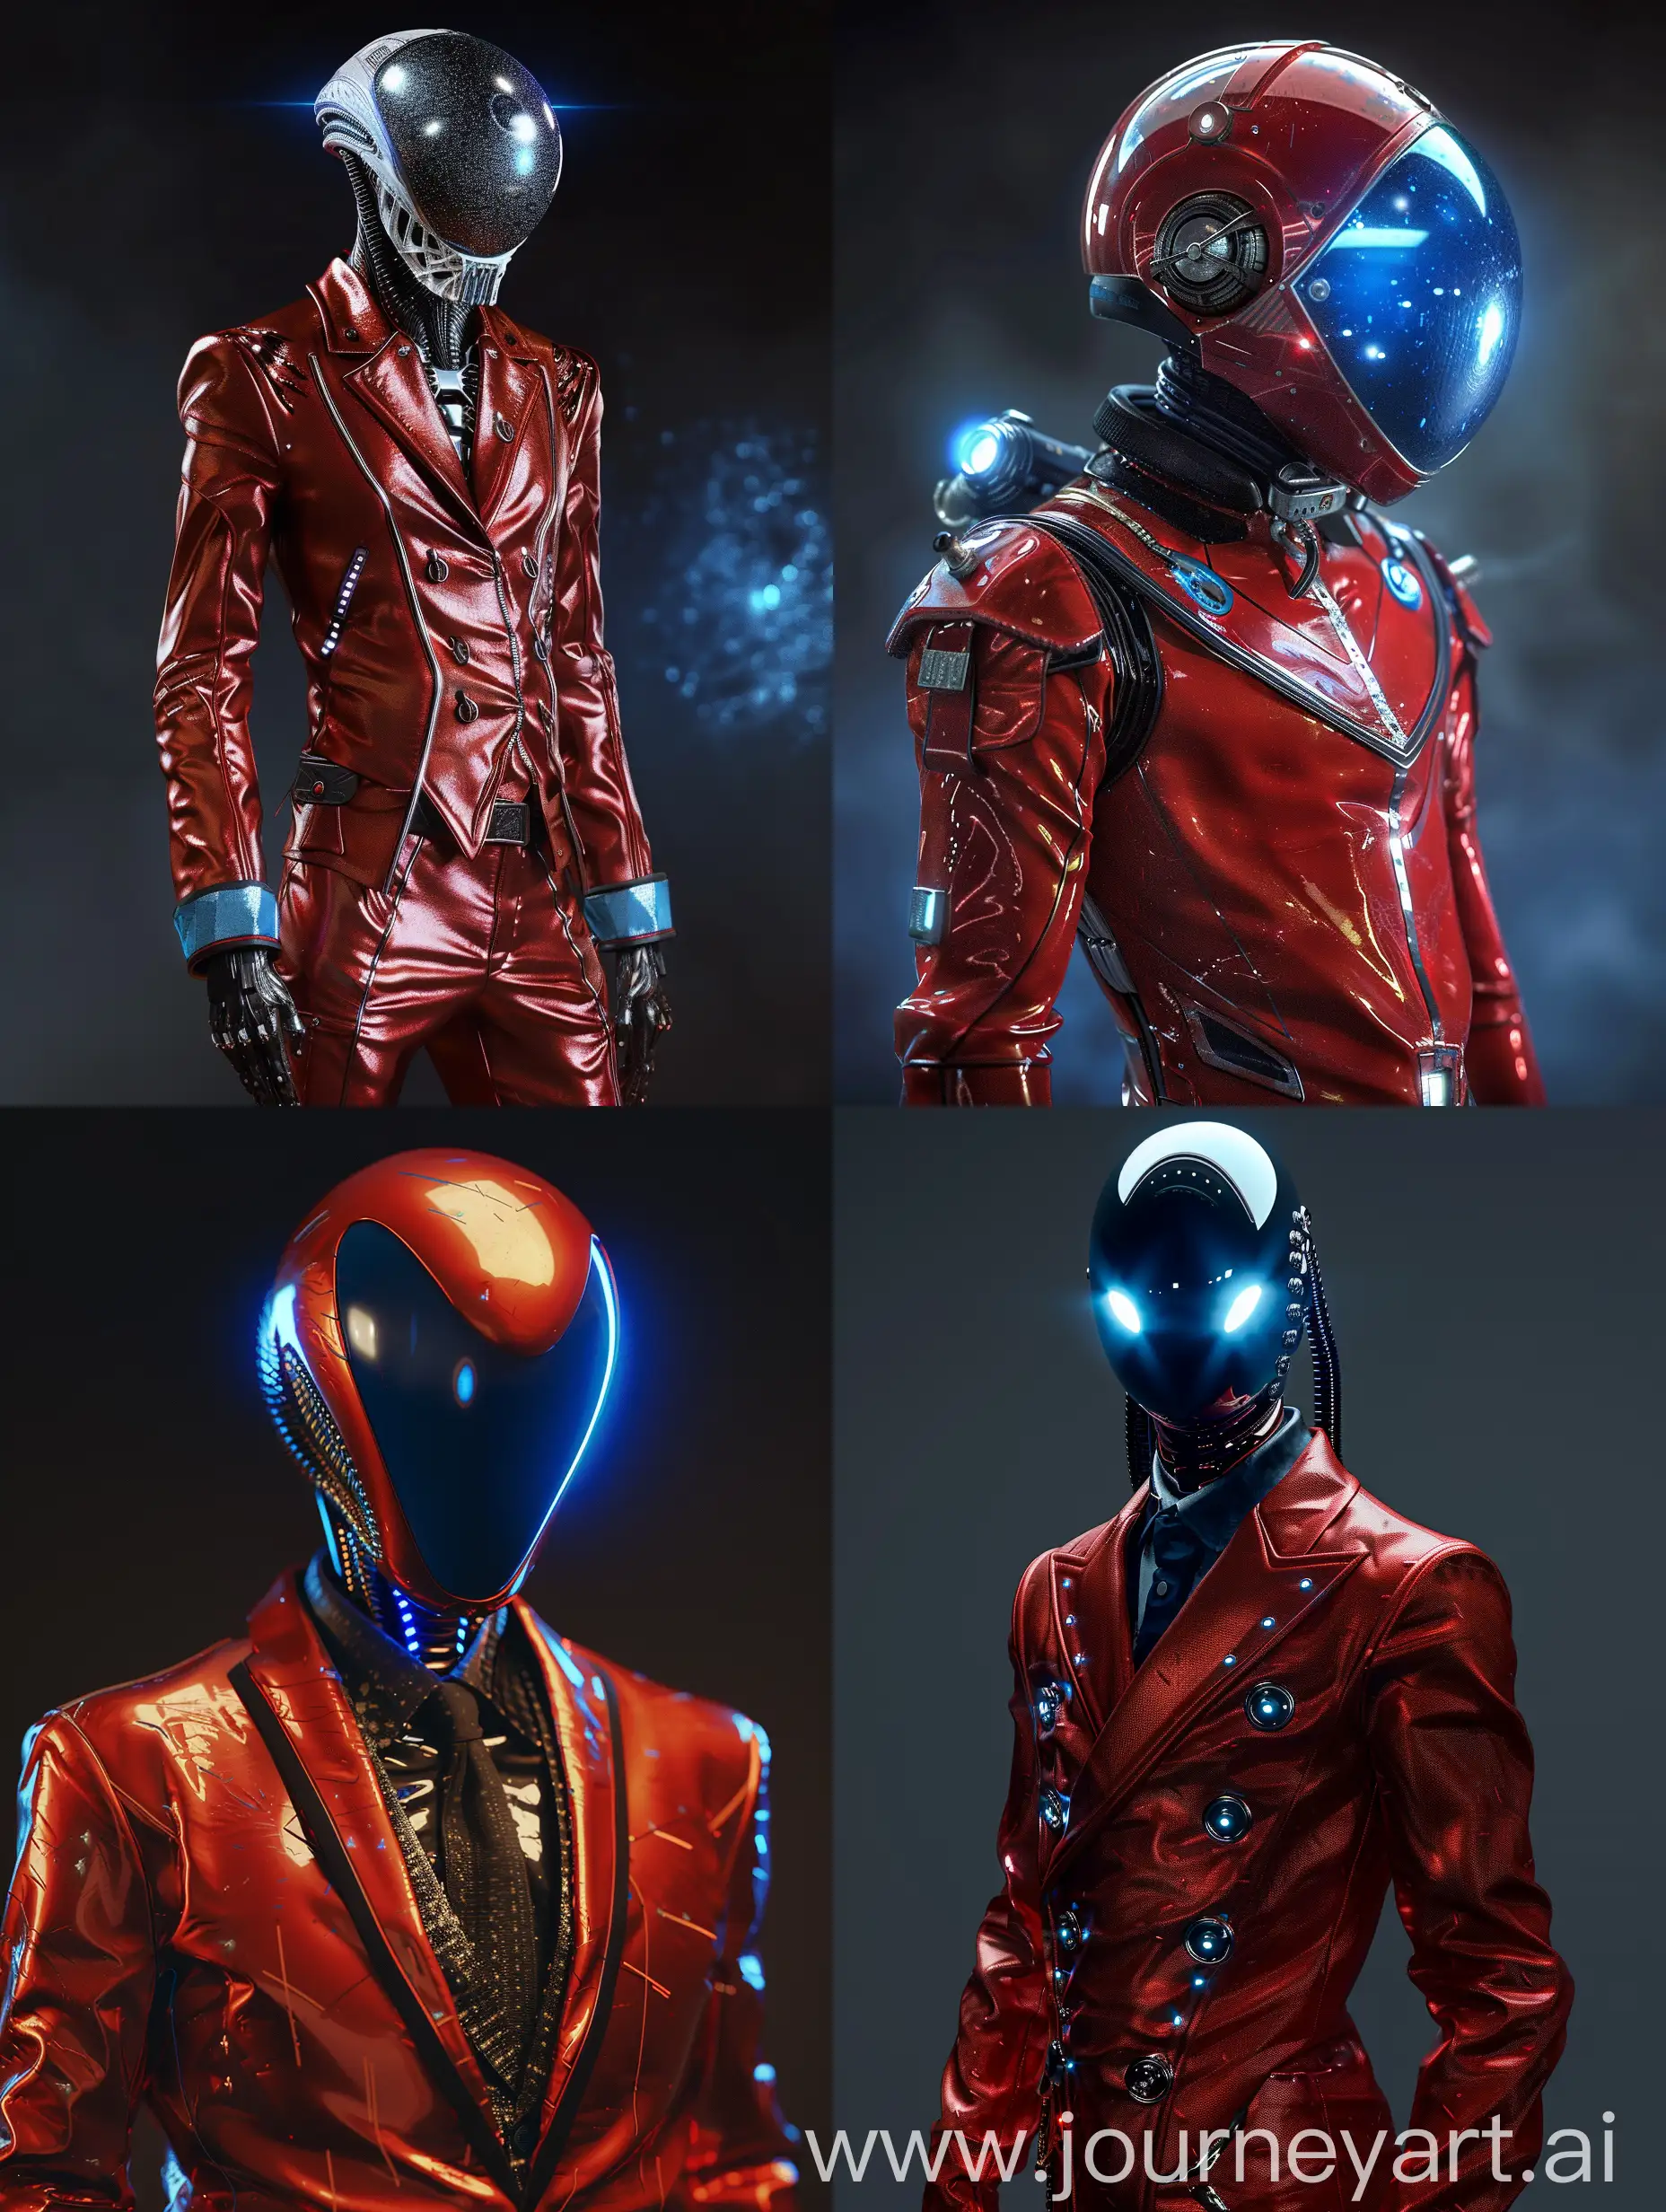 Pearl red suit weared space alien voyager concept art with fine crisp complex elegant details studio illuminated great soft ciaro oscuro shades mid contrast 28 mm camera lens shot cinematic compose blue rim light illuminated sharp focus ultra realist render photo